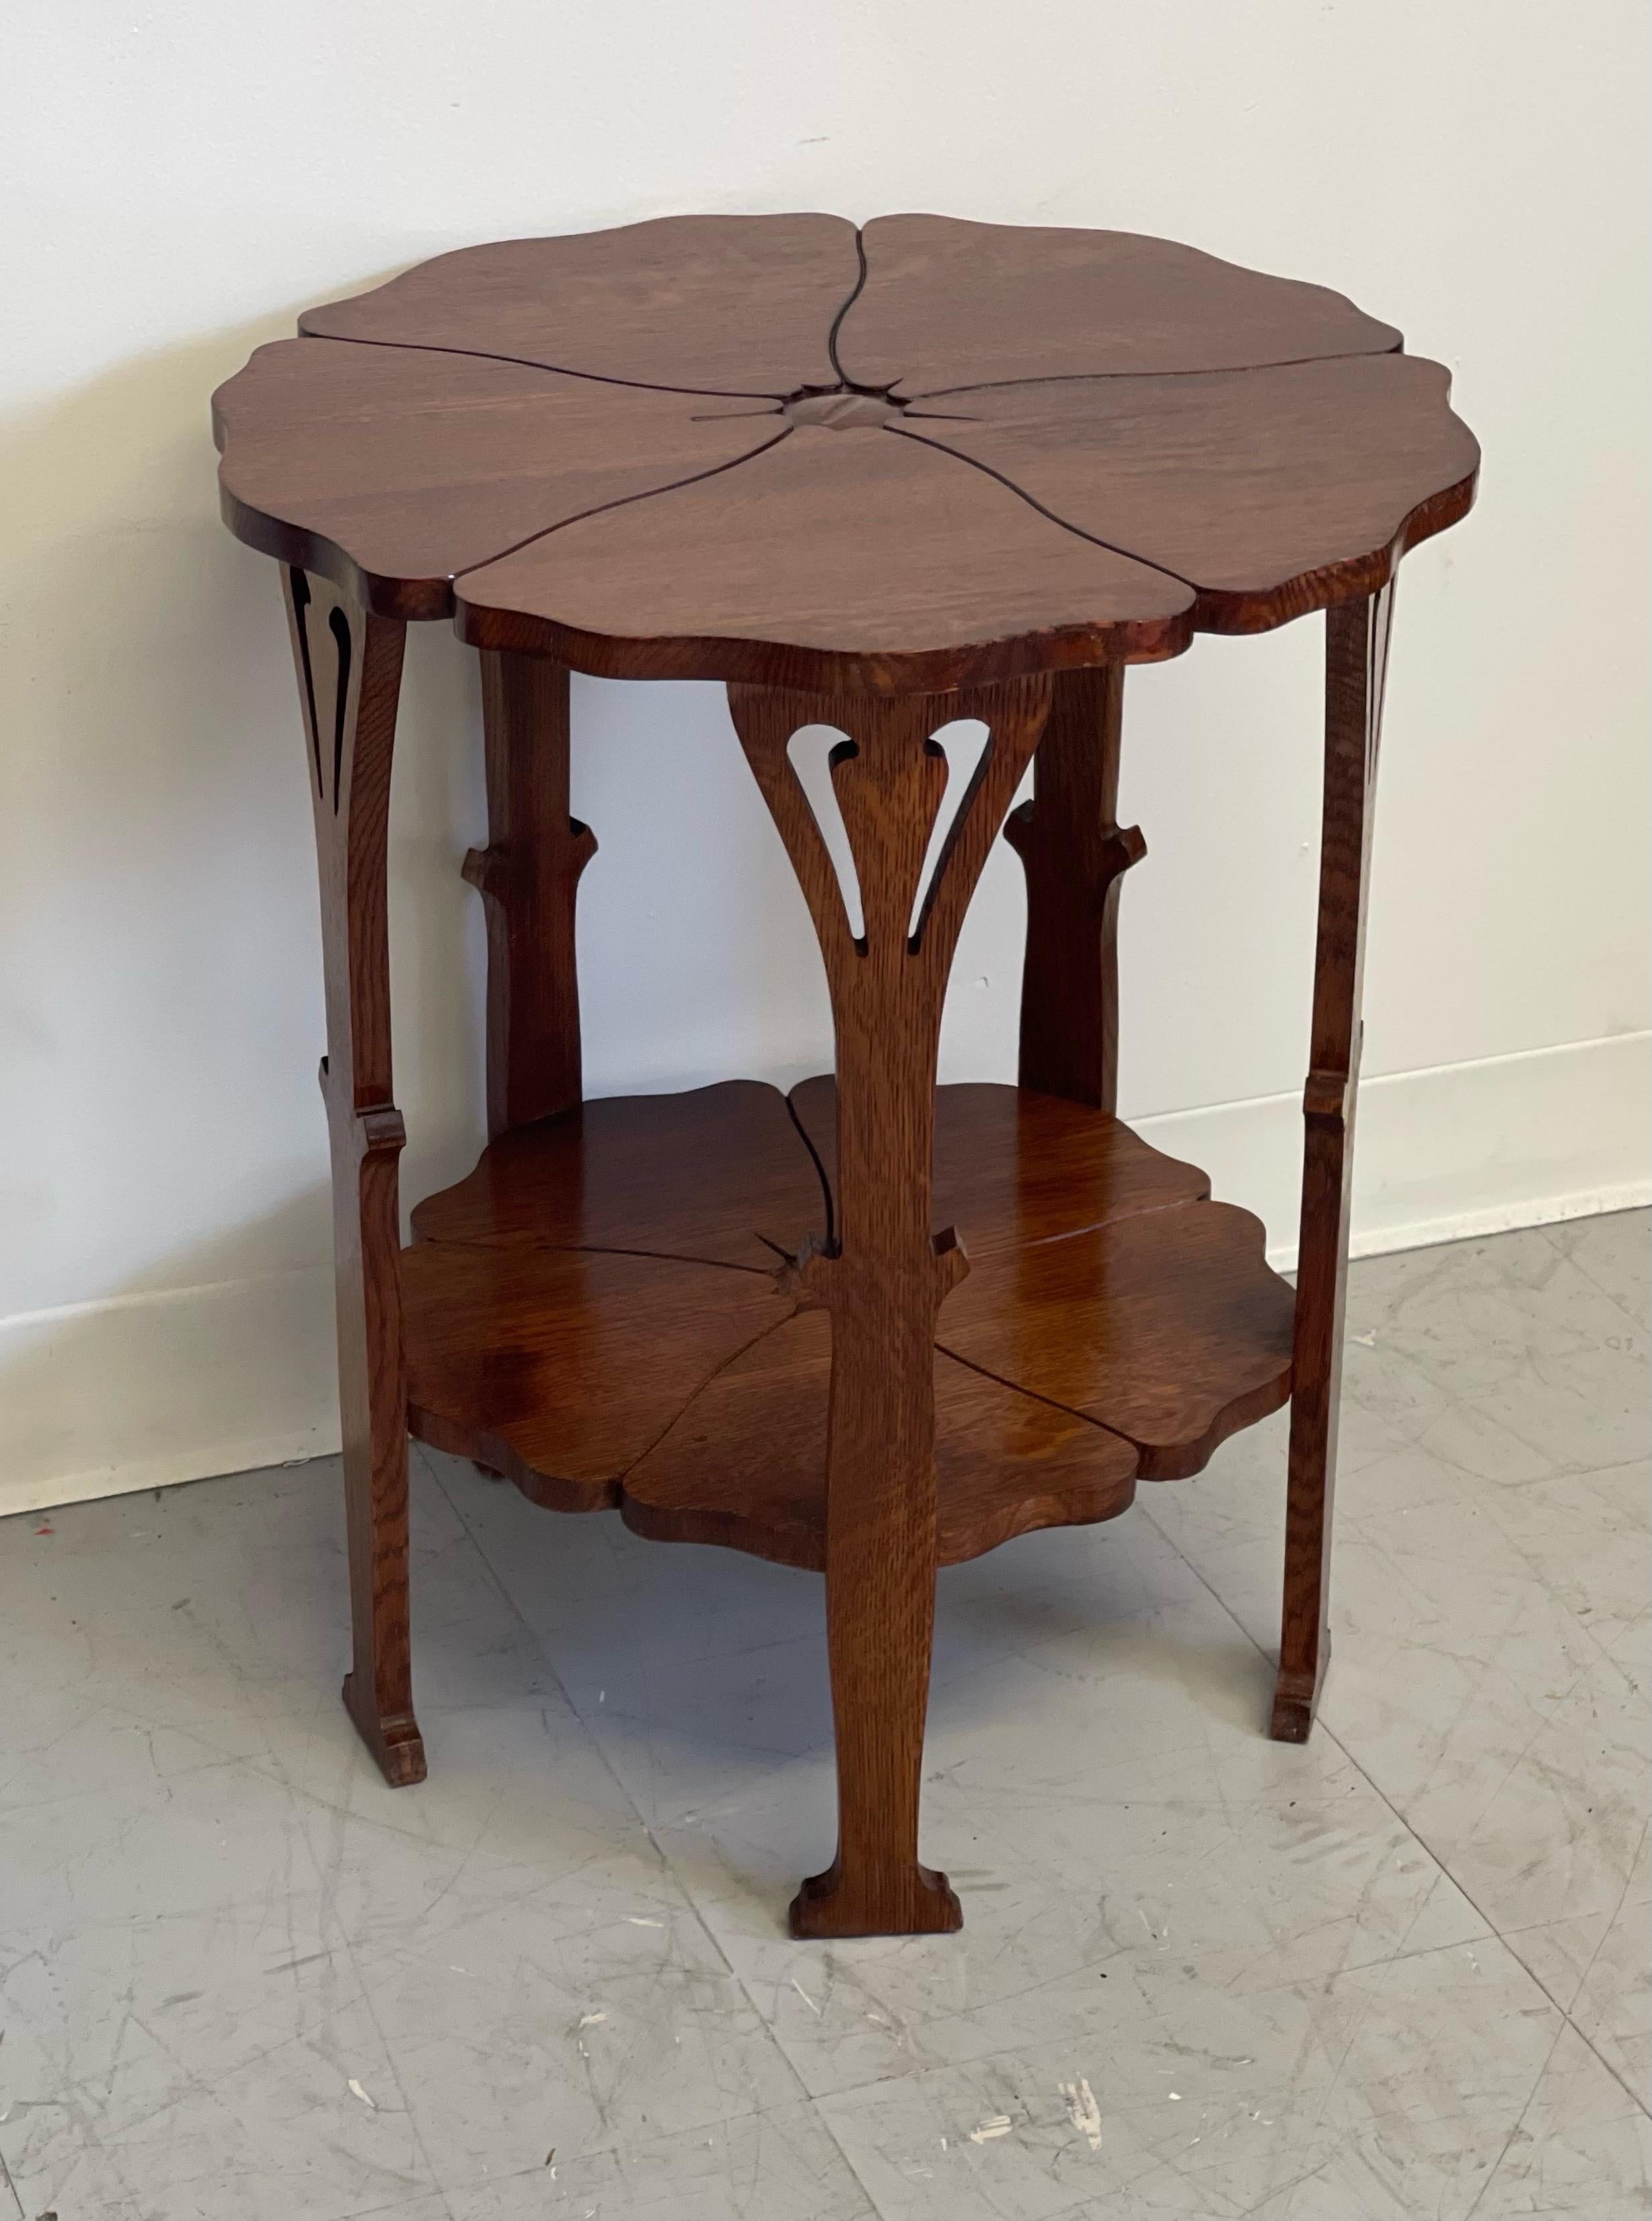 Wood Delicately Designed Antique Gustave Stickily Poppy Table With Floral Motif For Sale